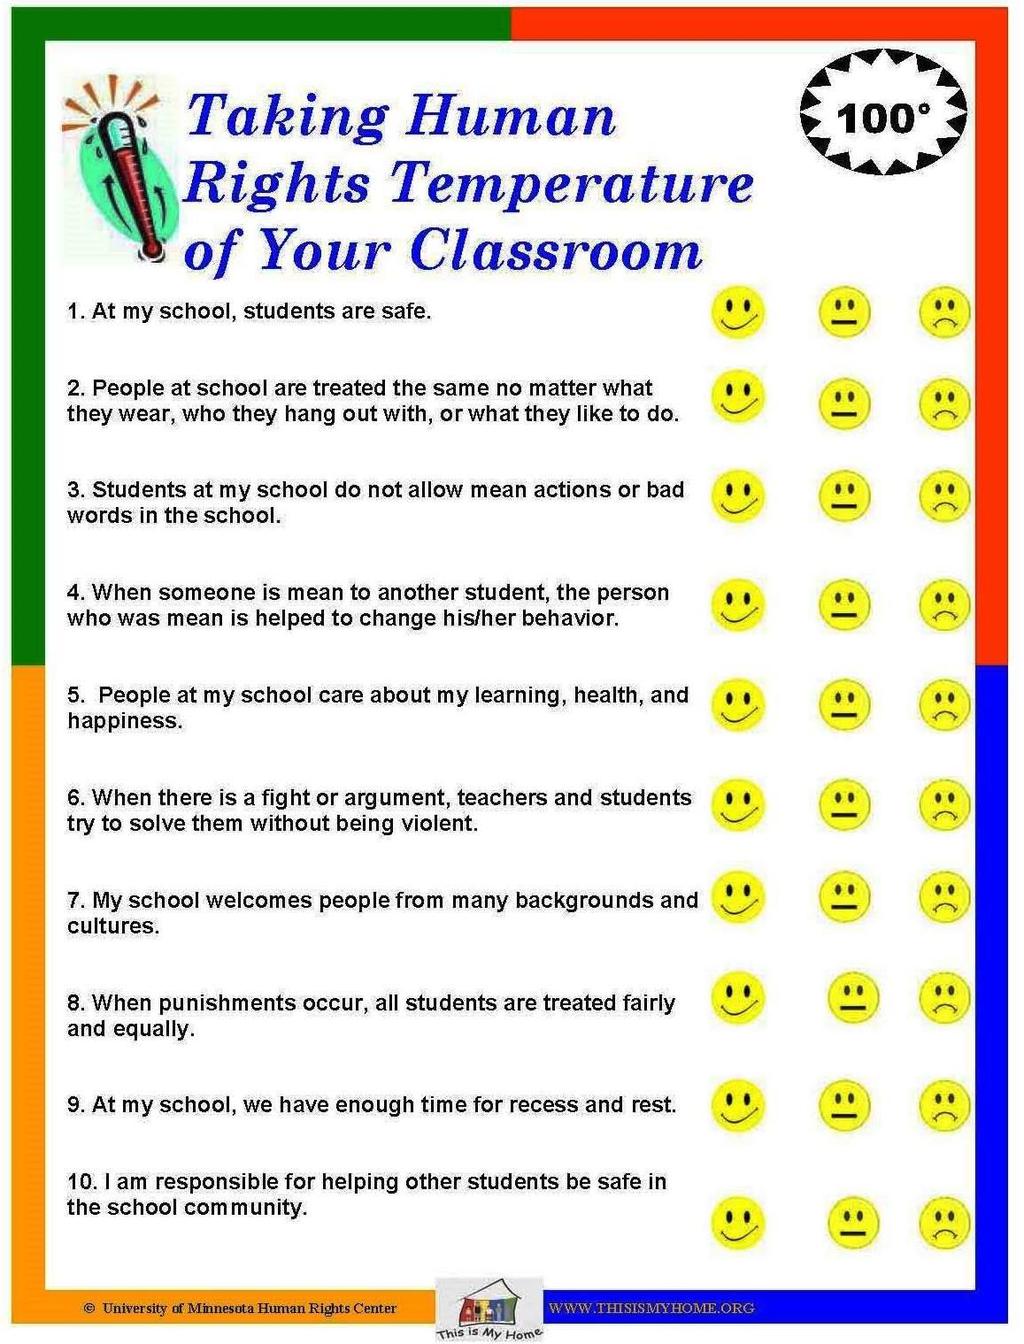 Taking the Human Rights Temperature of your Classroom Here is a classroom exercise you